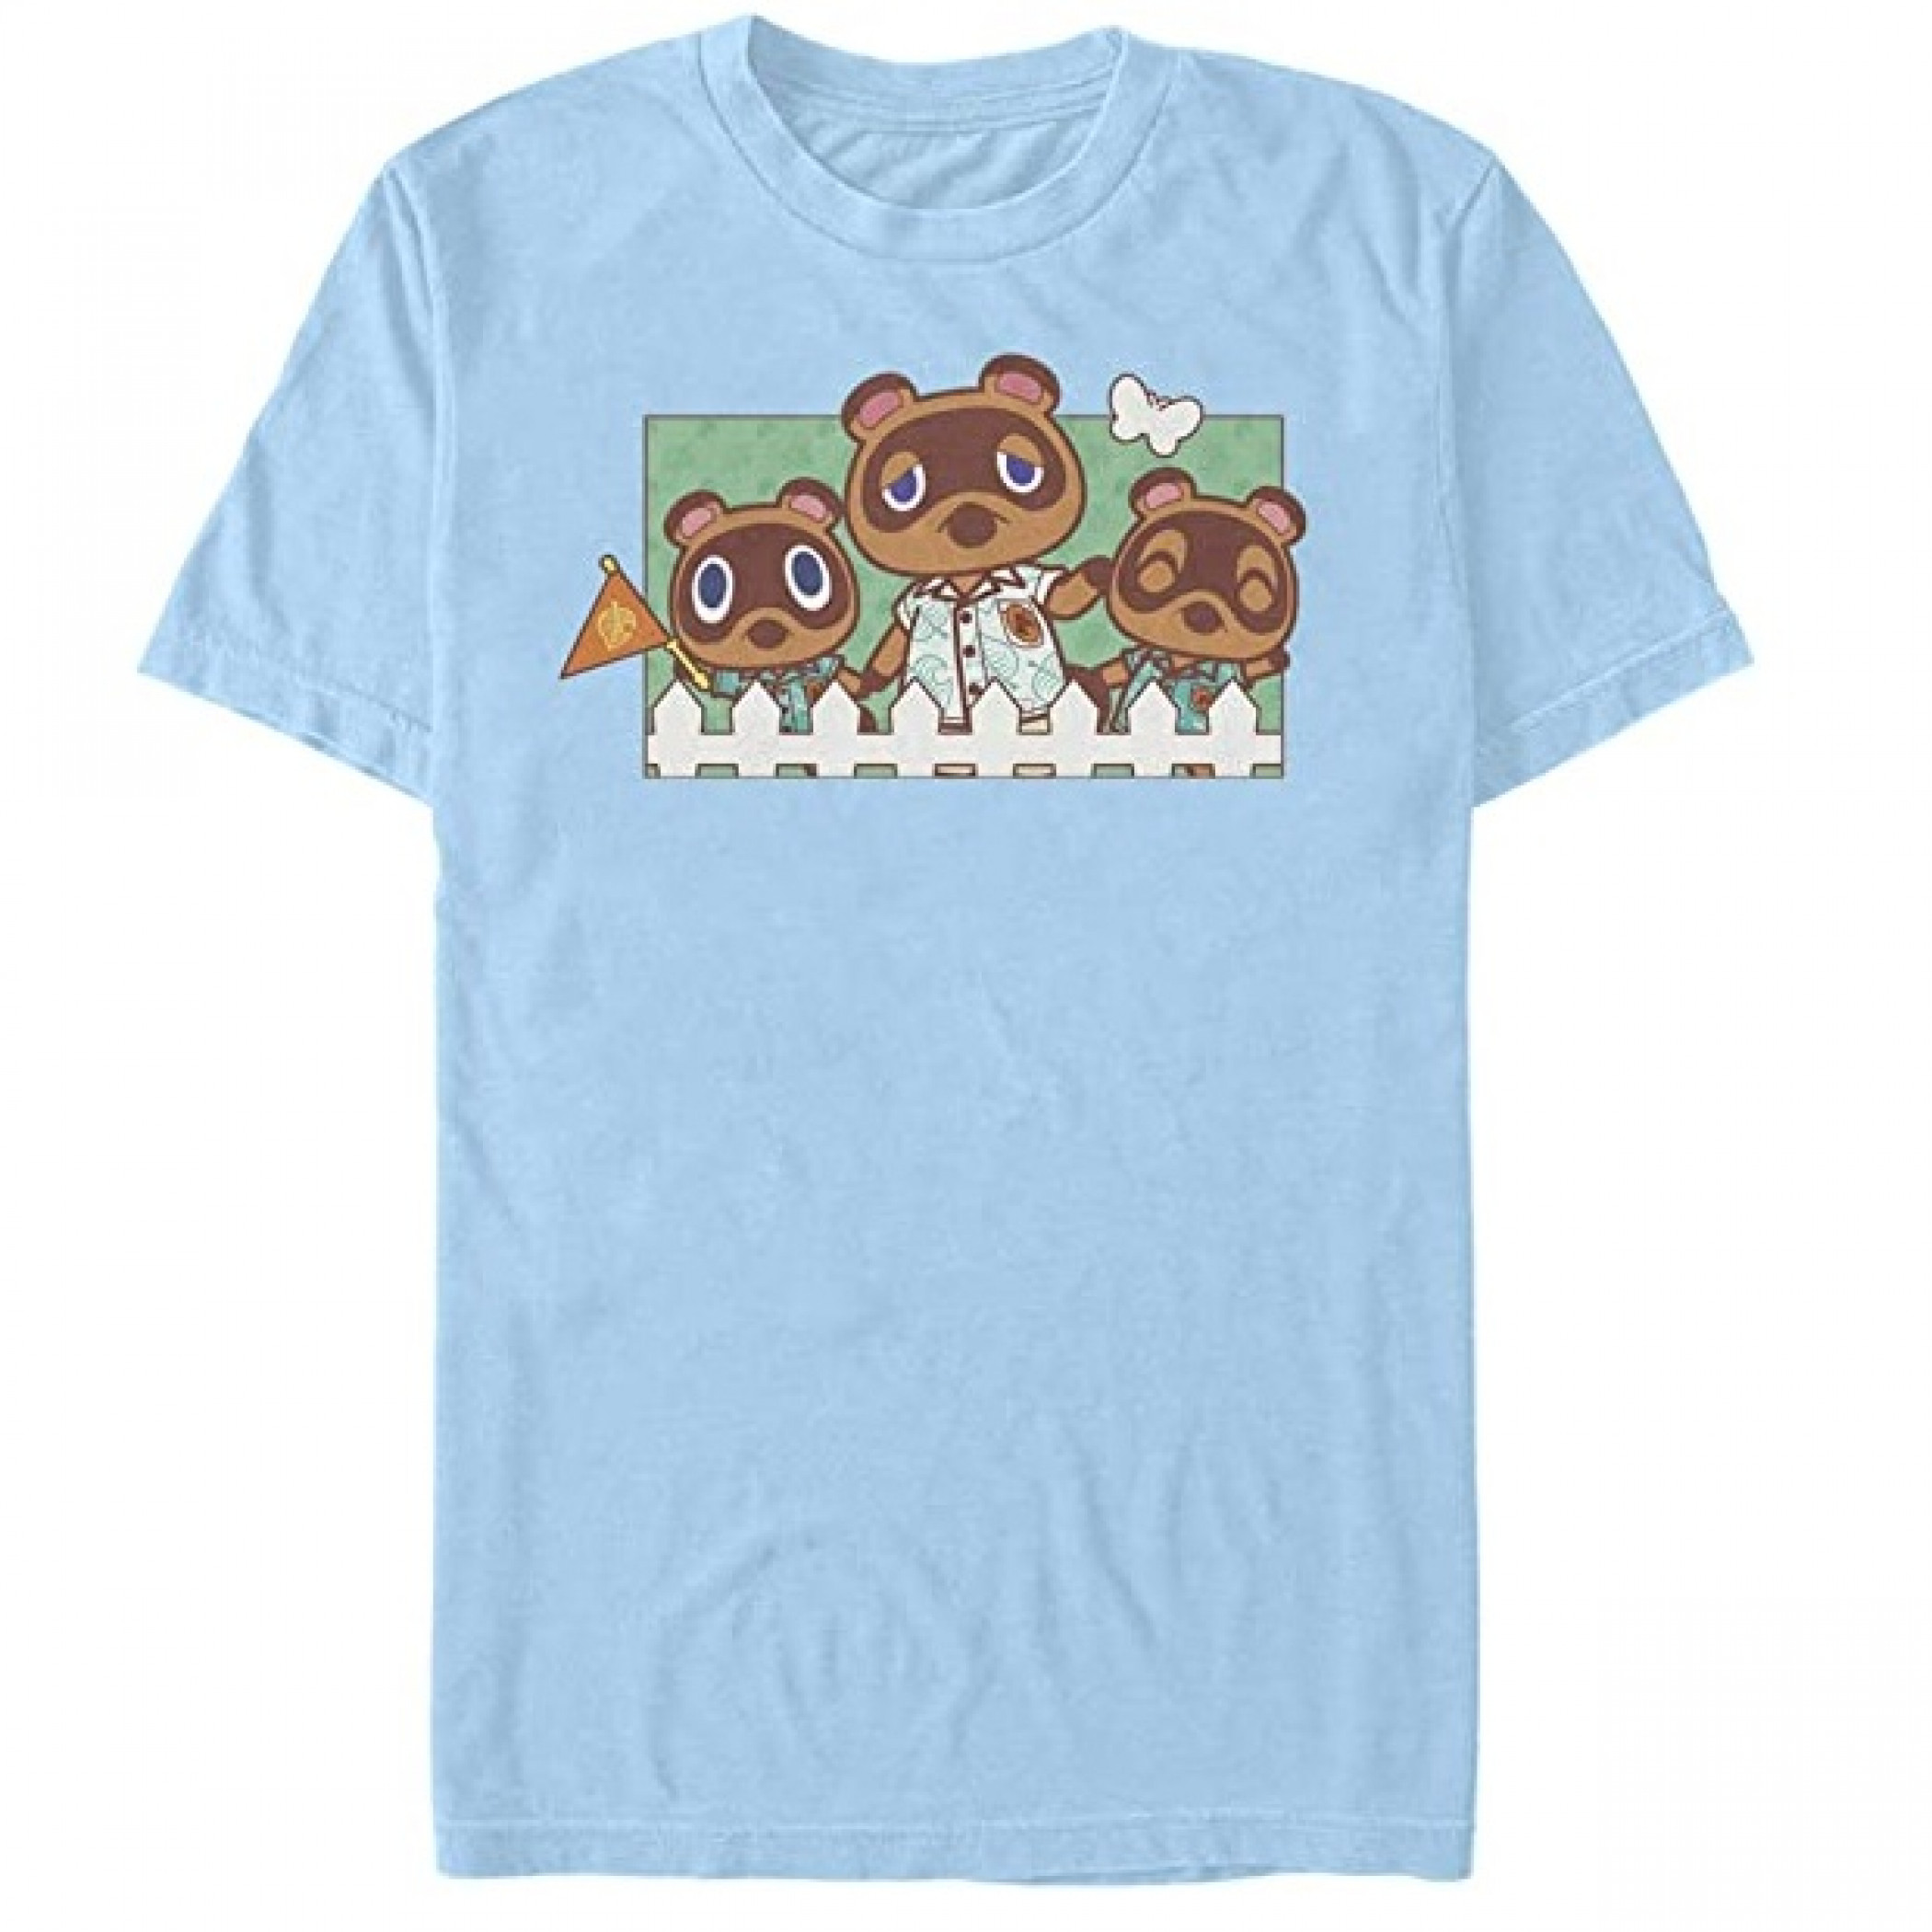 Animal Crossing Tom Nook and The Nooklings T-Shirt